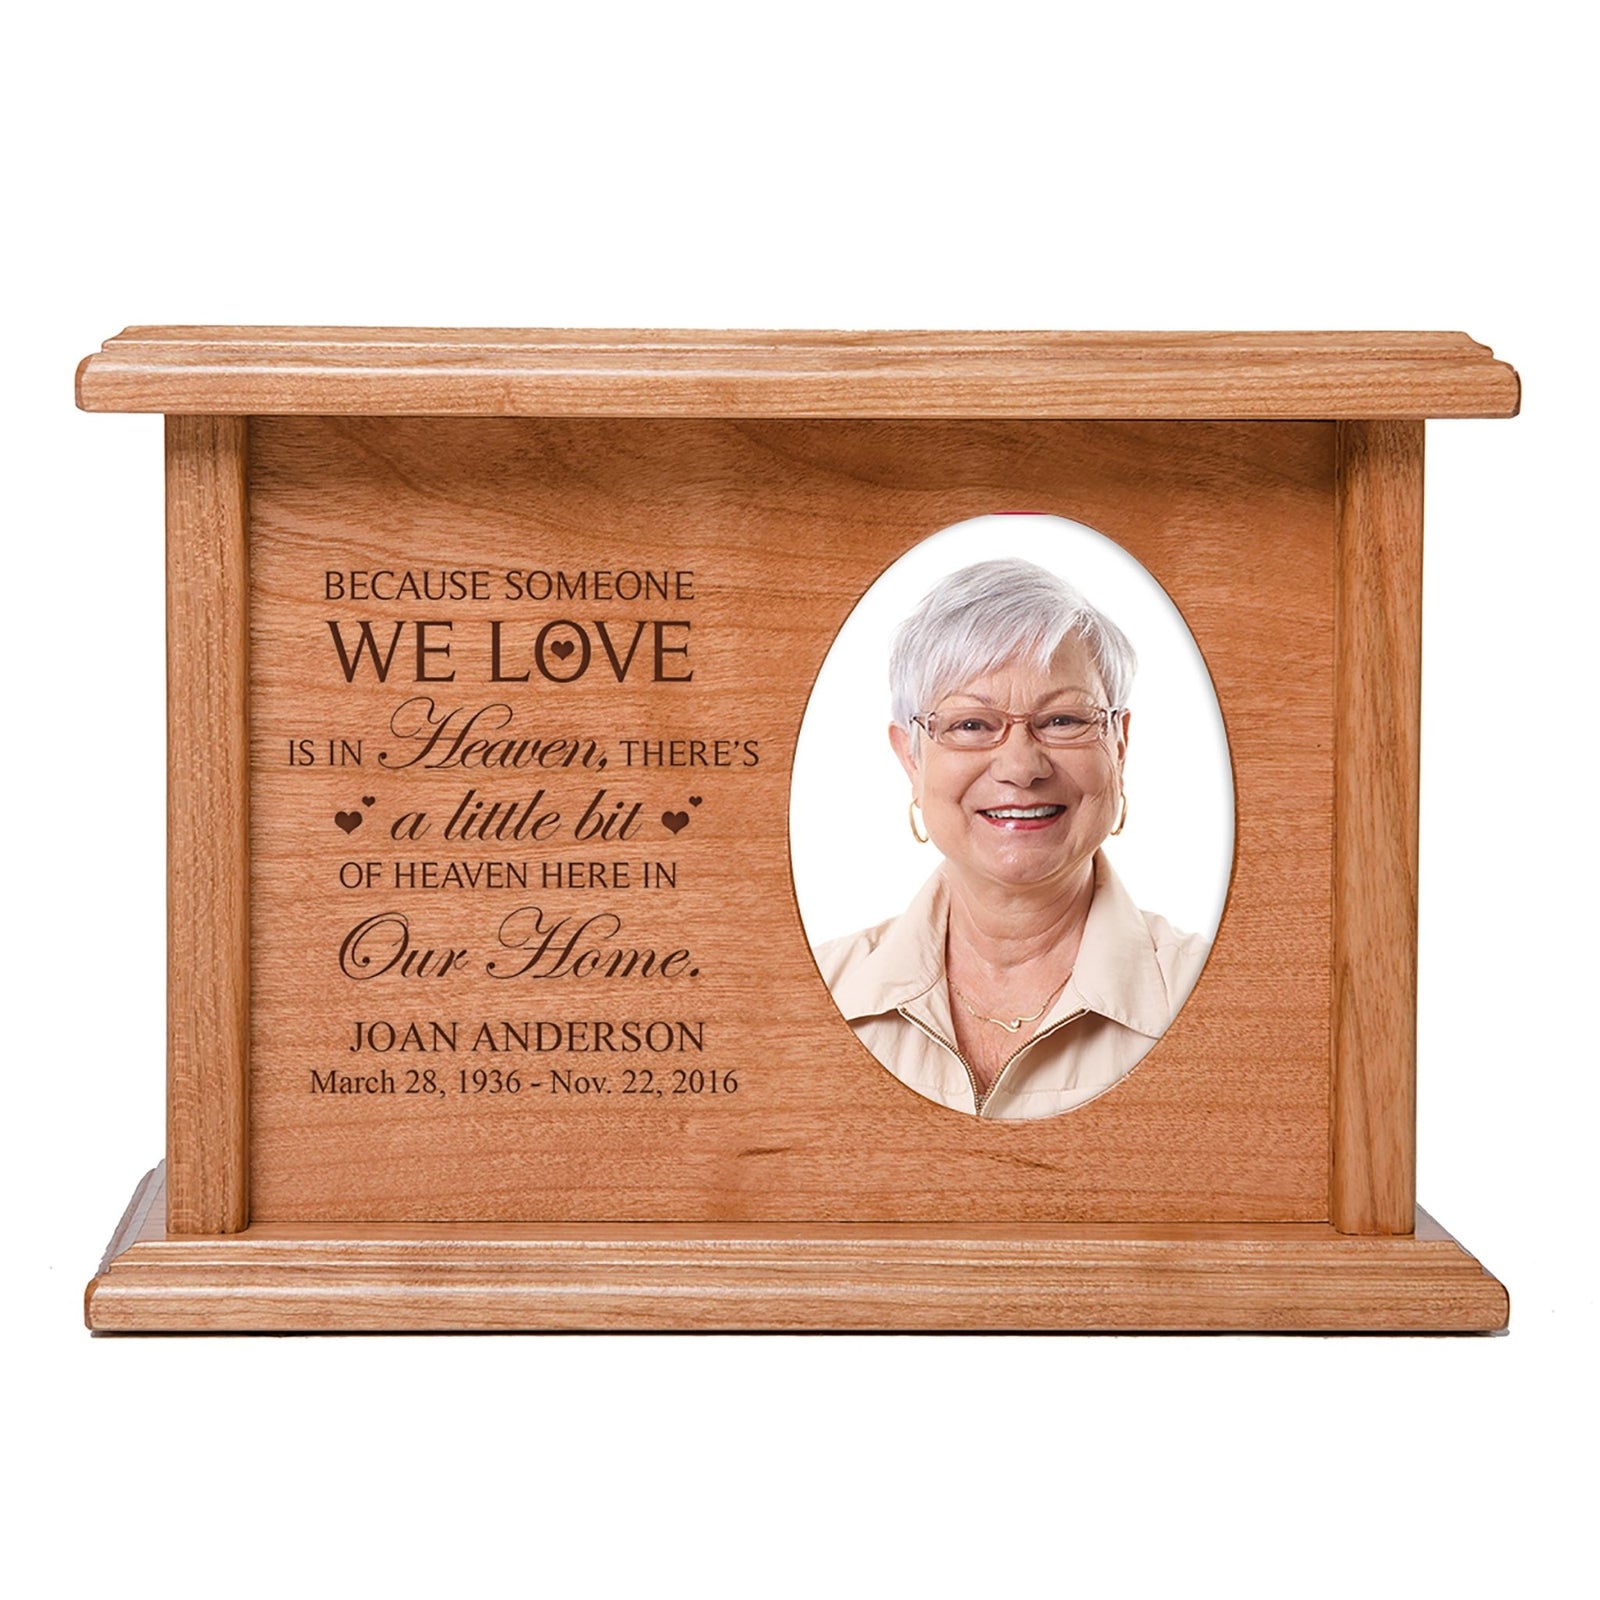 Custom Memorial Cremation Urn Box for Human Ashes holds 2x3 photo and holds 65 cu in Because Someone - LifeSong Milestones